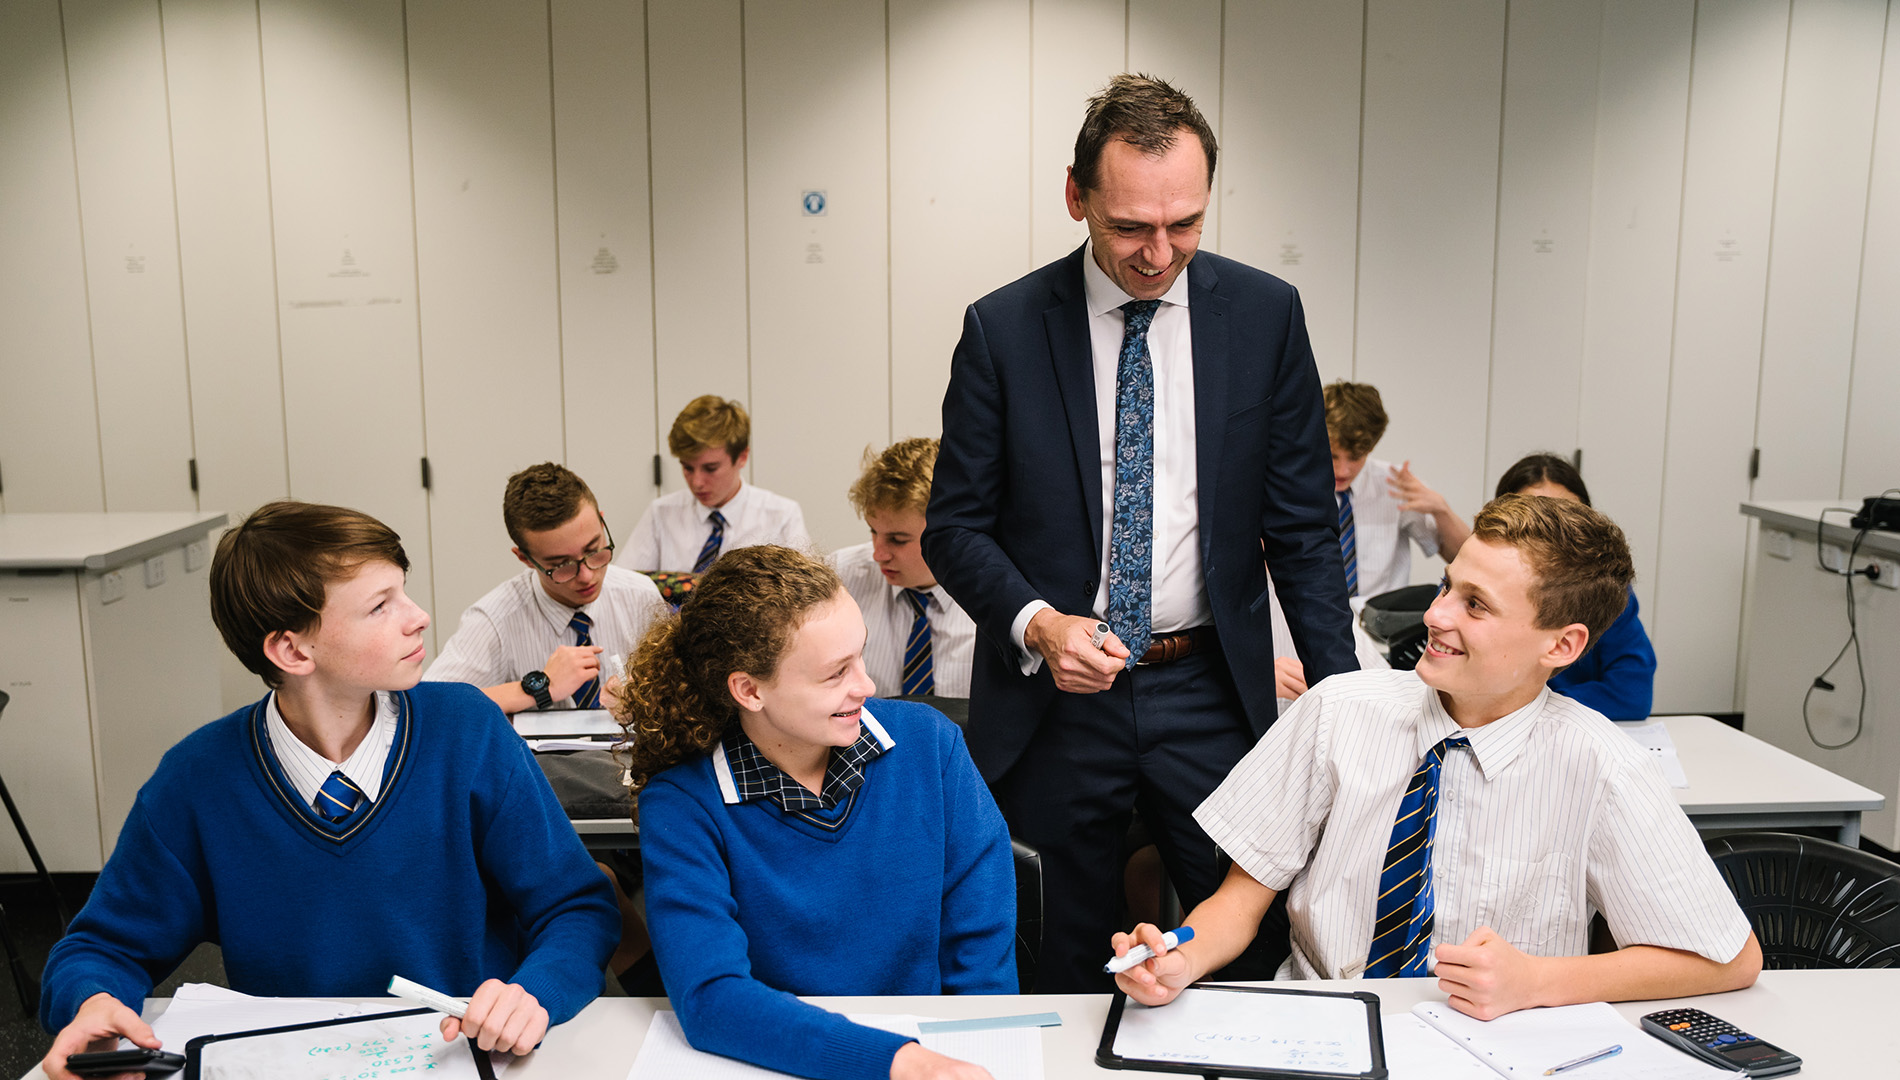 Image of Mark Liddell helping students in class.